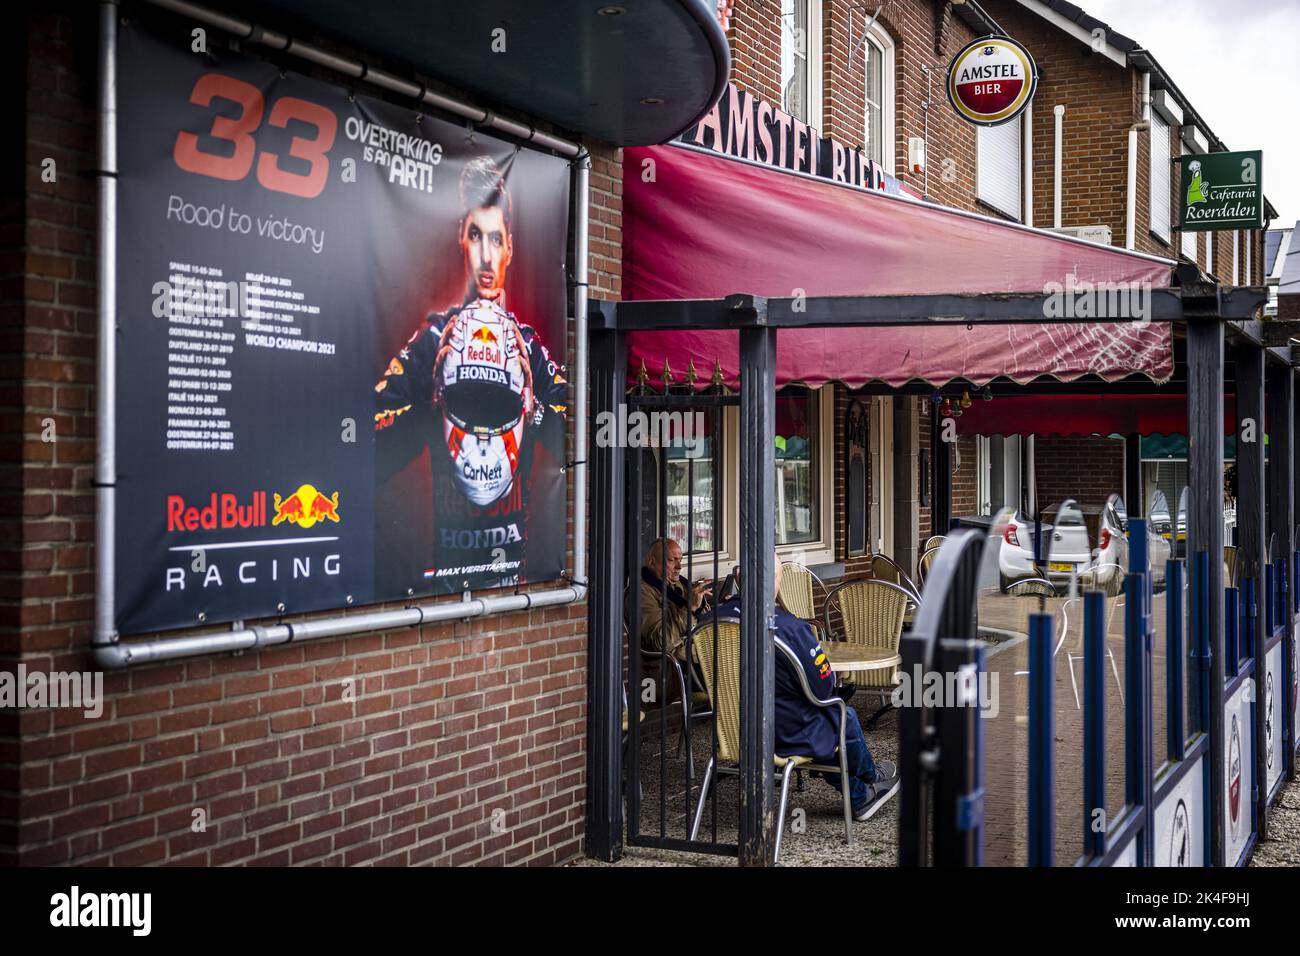 2022-10-02 14:13:57 MONTFORT - Max Verstappen fans gather at a cafe to watch the Singapore Grand Prix. It is the sixth race before the end of the season and with a win Verstappen could already be world champion. Jos Verstappen, father of, is originally from the Limburg village. ANP ROB ENGELAAR netherlands out - belgium out Stock Photo